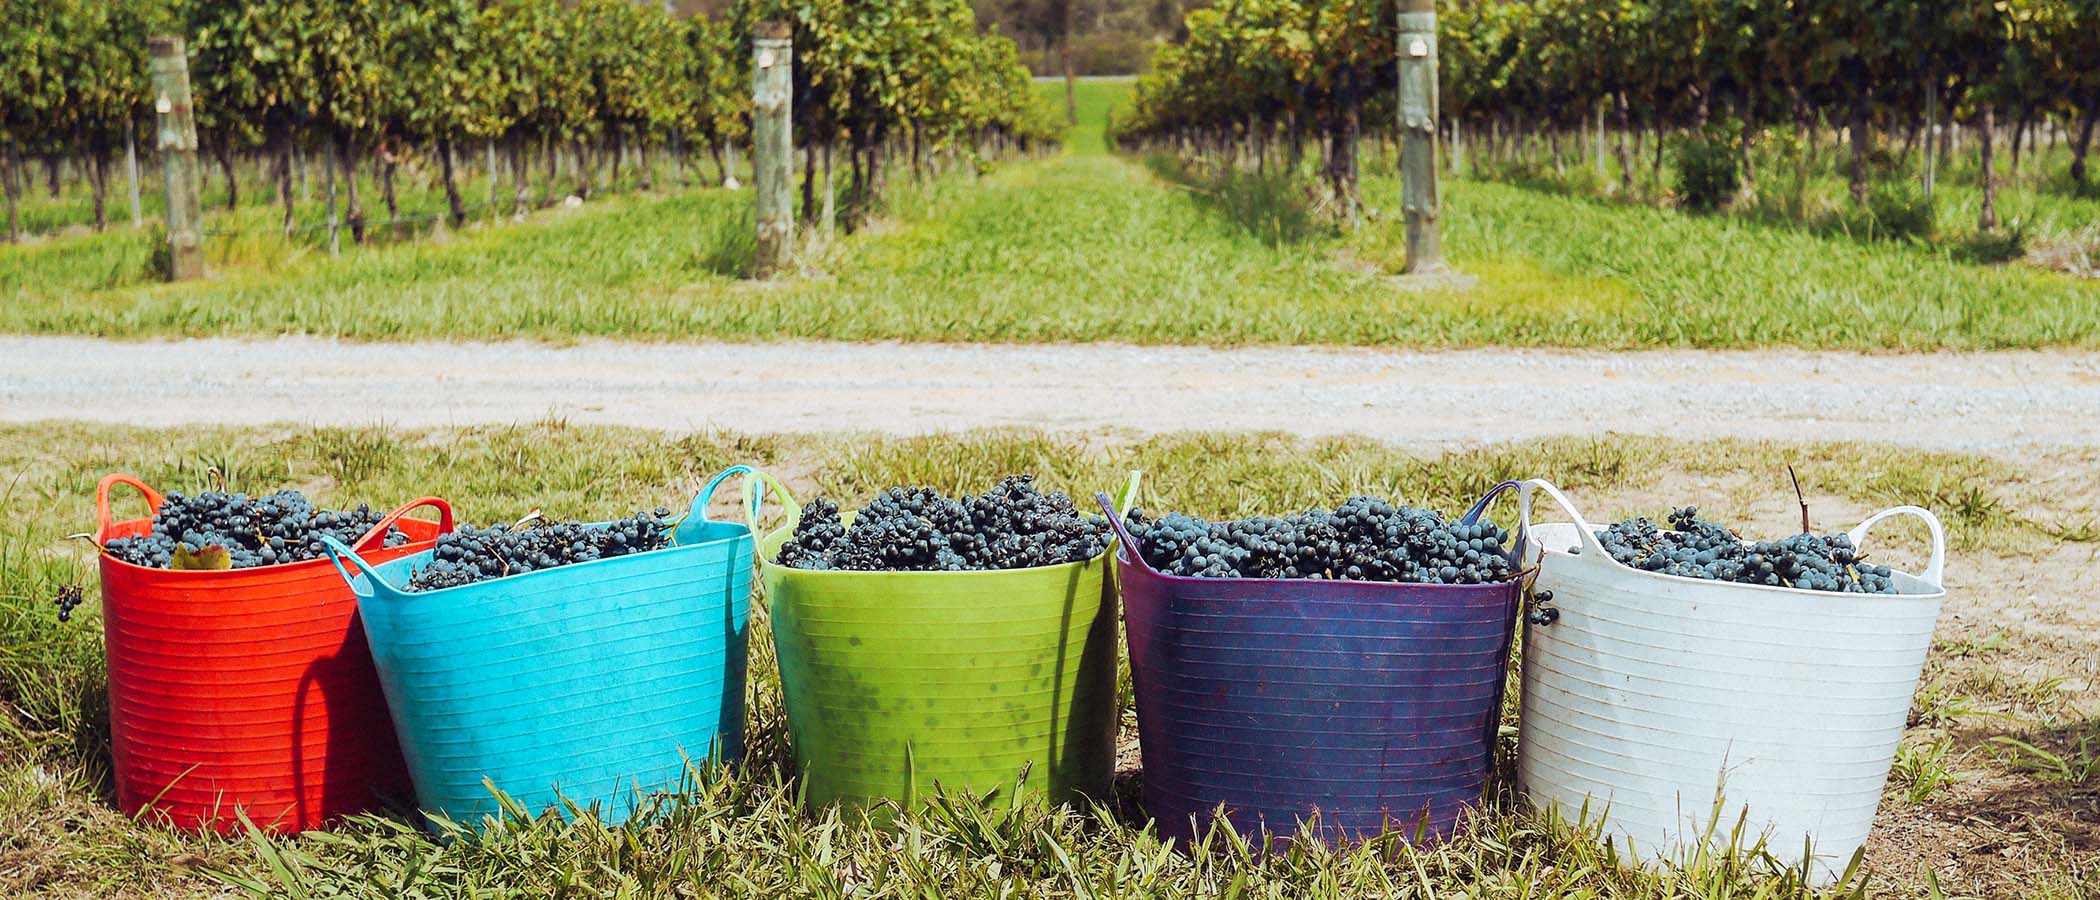 Colorful totes lined up on grass in front of vineyard rows